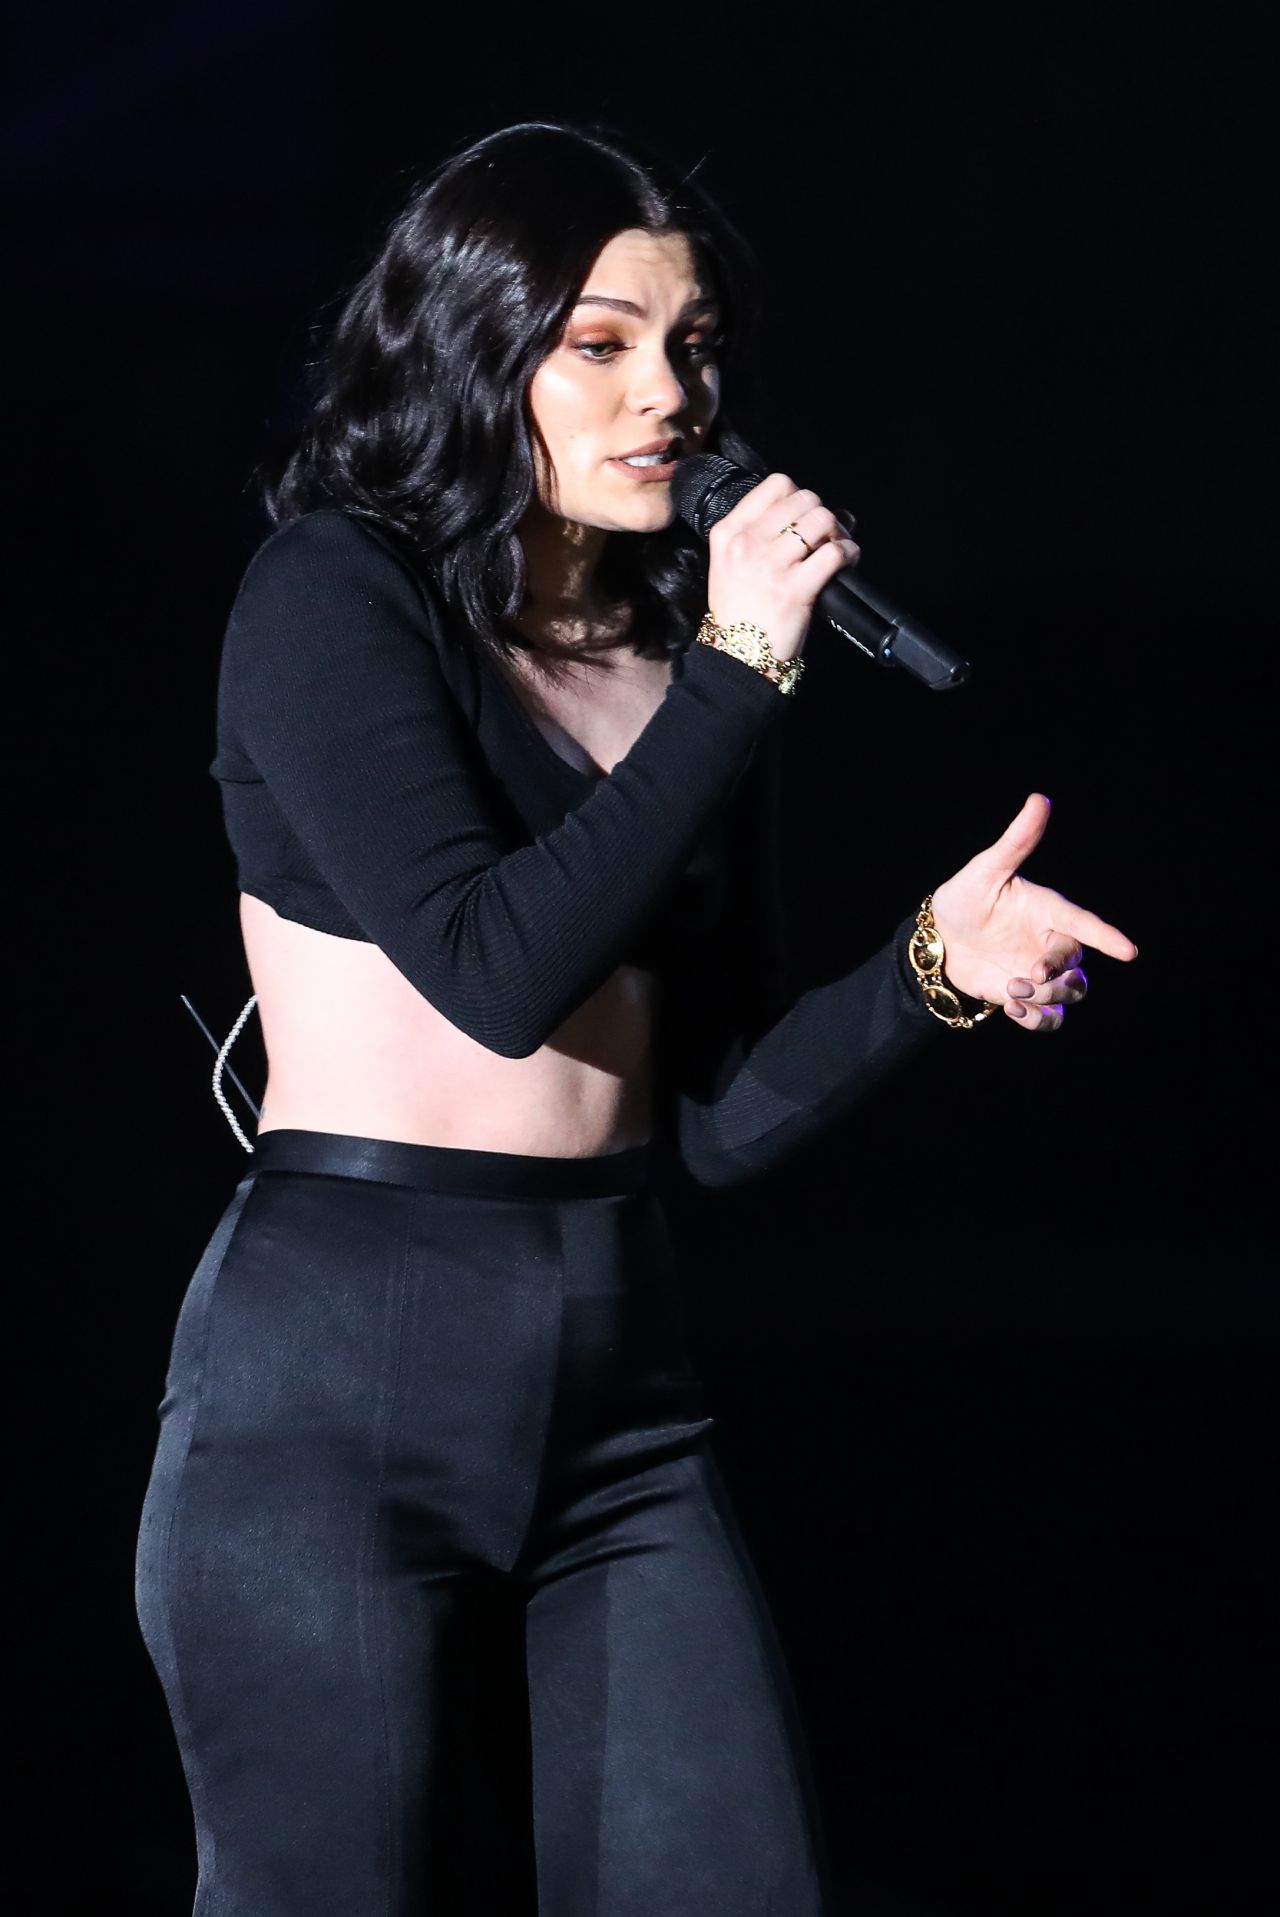 Jessie J - WE Day Show at Wembley Arena in London 3/22/ 20171280 x 1917